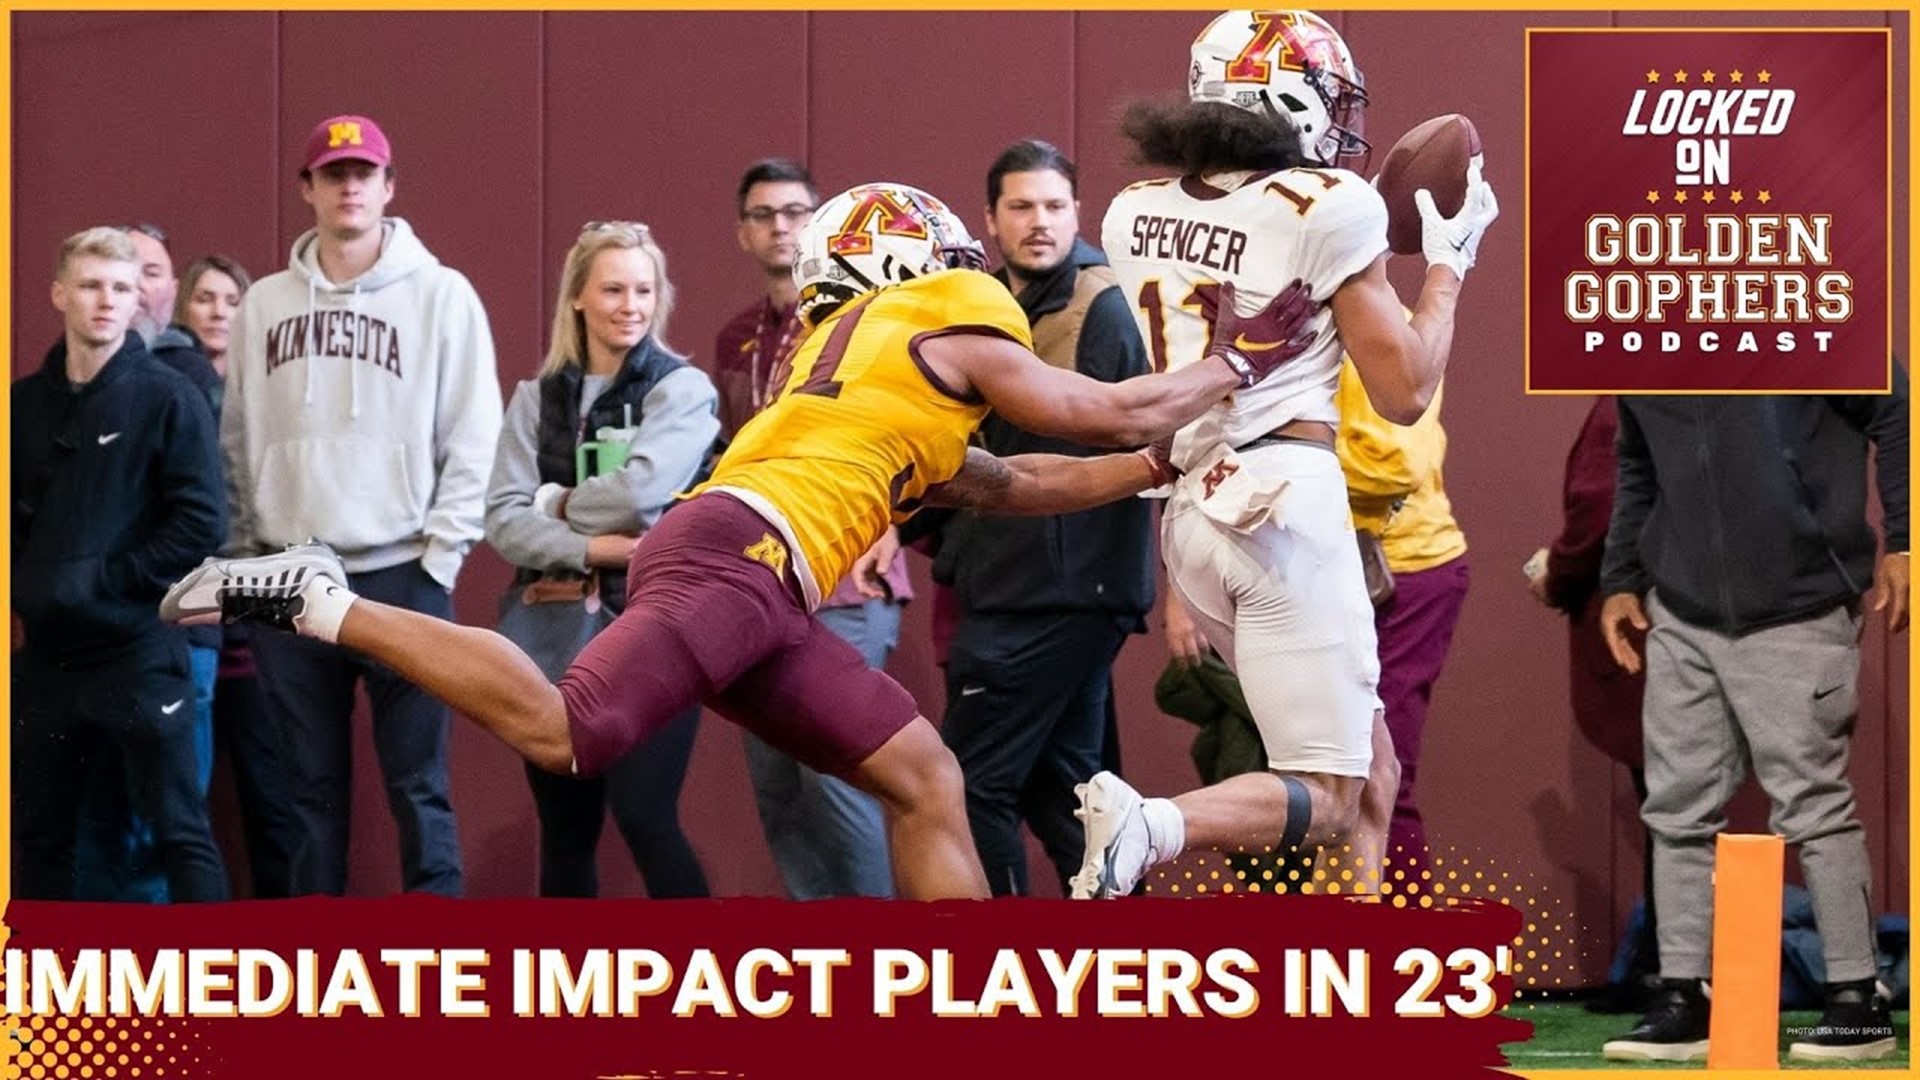 On today's show we discuss five players added to the roster who will make an immediate impact to the Minnesota Gophers roster in the 2023 football season.